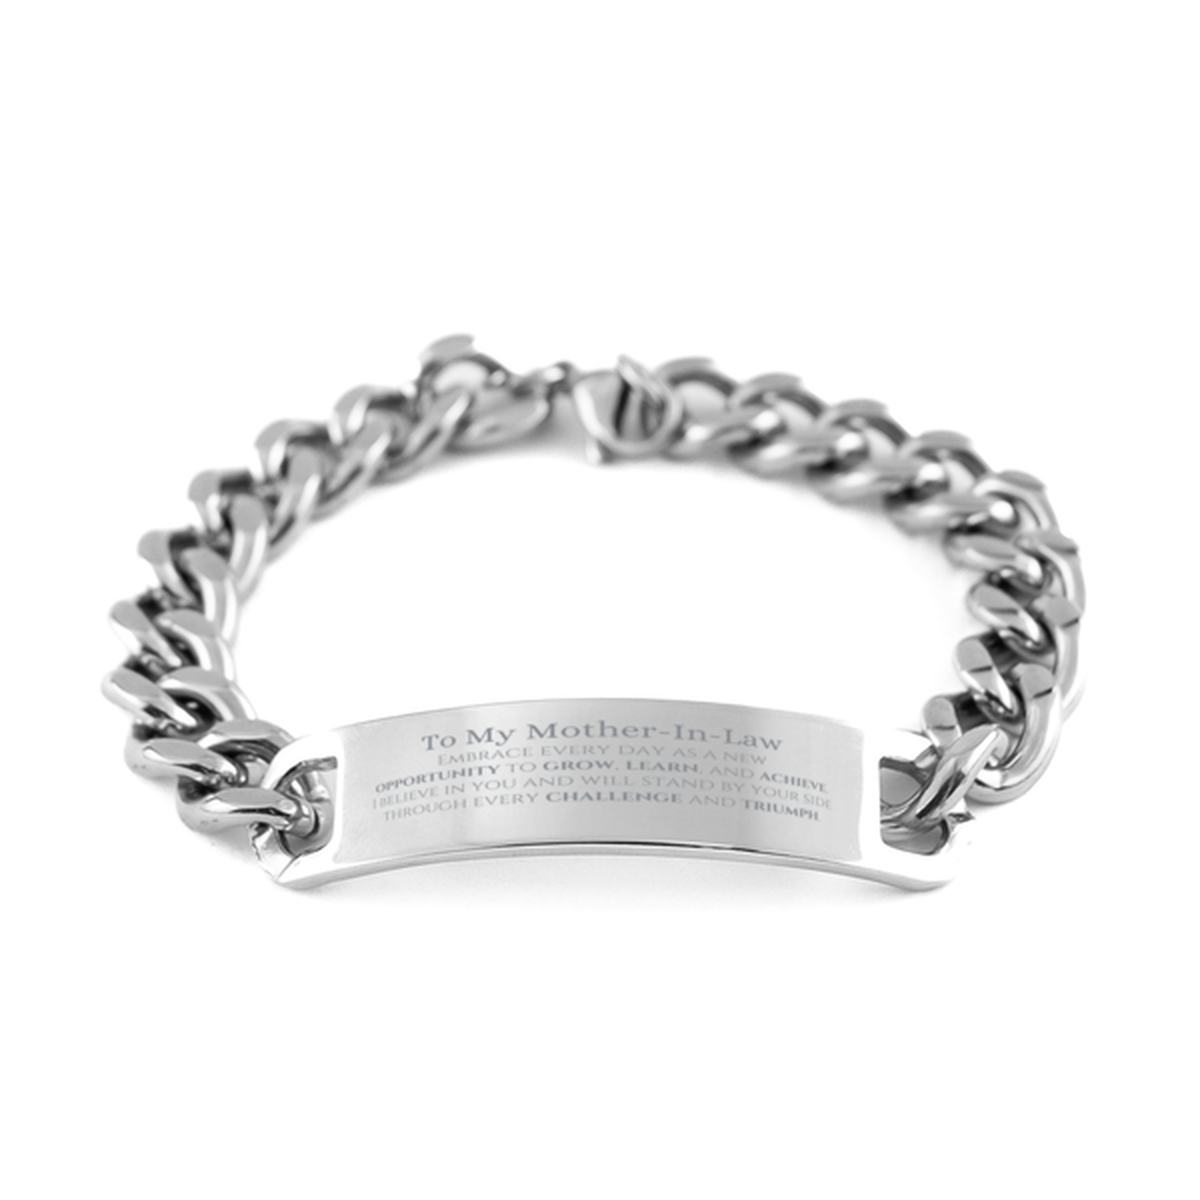 To My Mother-In-Law Gifts, I believe in you and will stand by your side, Inspirational Cuban Chain Stainless Steel Bracelet For Mother-In-Law, Birthday Christmas Motivational Mother-In-Law Gifts